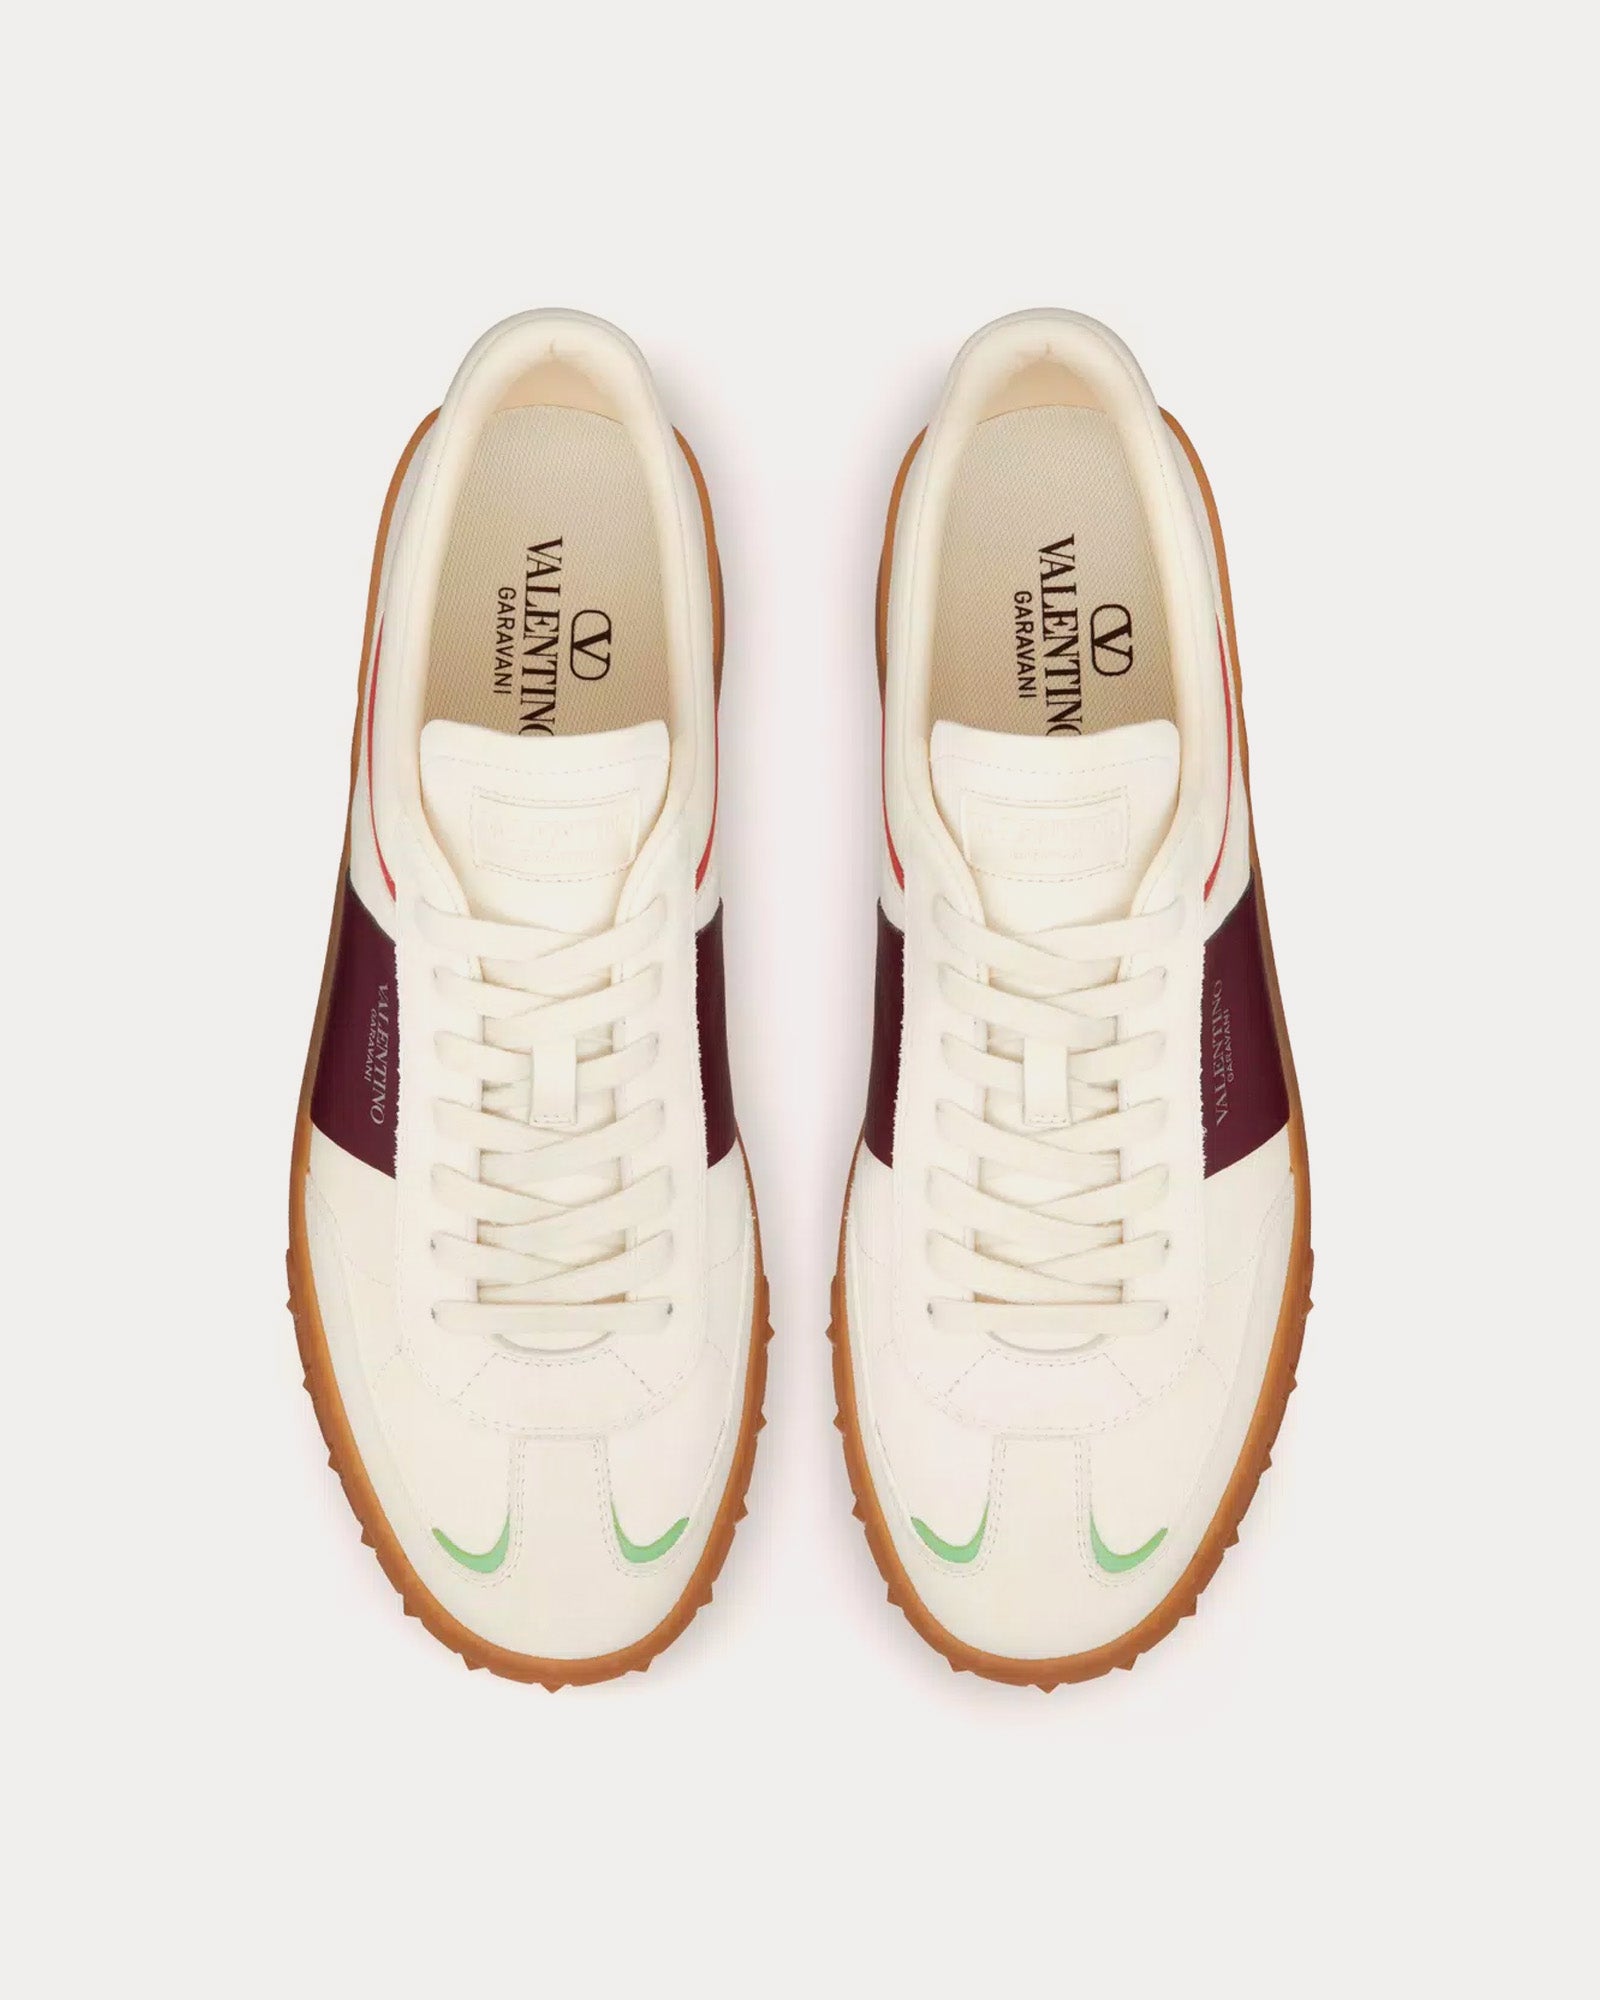 Valentino - Upvillage Leather Ivory / Wine / Mint / Amber Low Top Sneakers